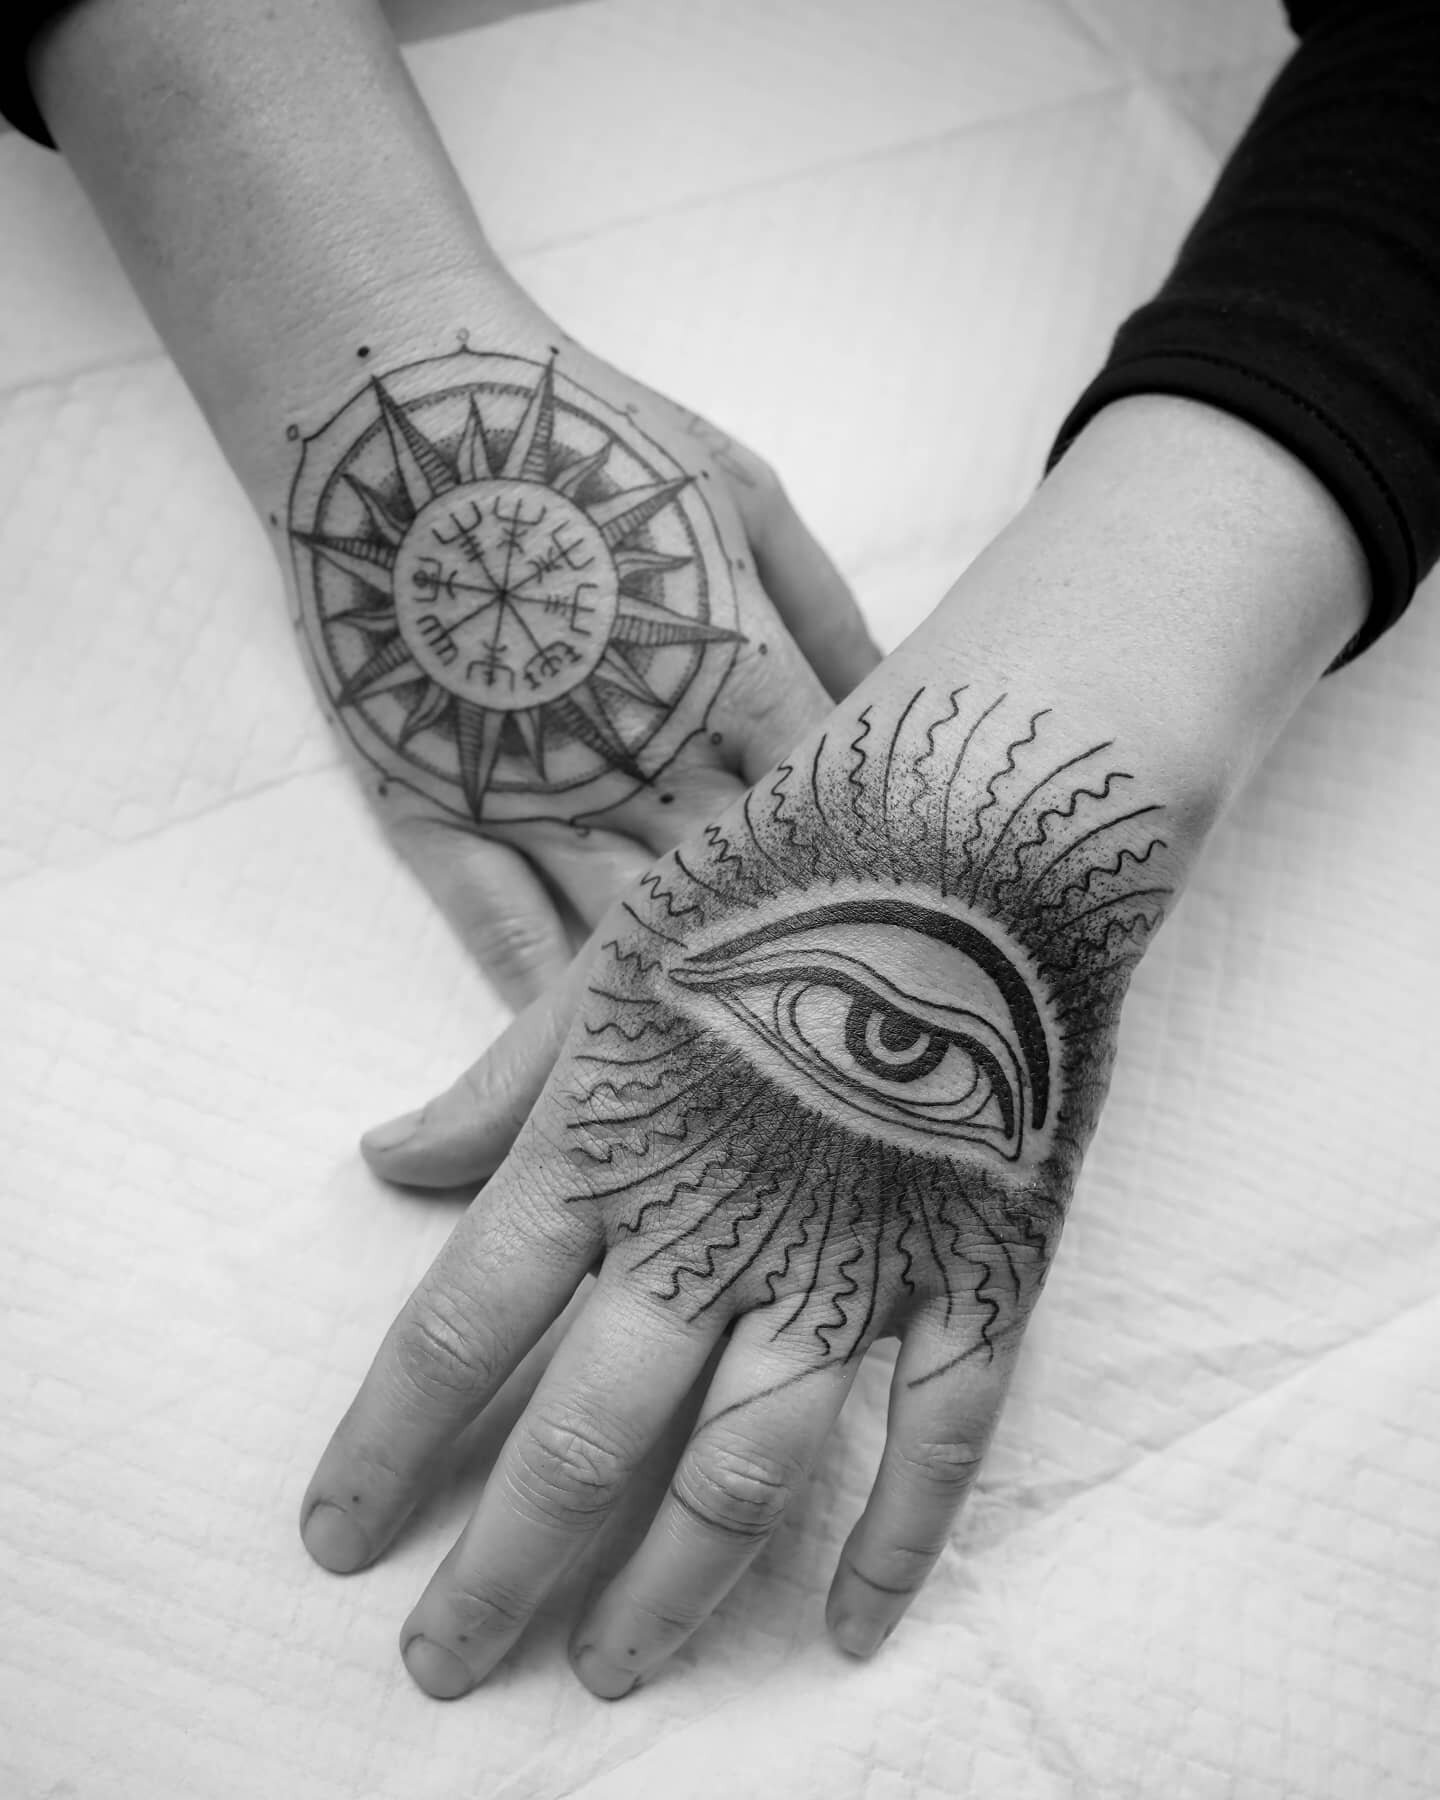 Hand tattoos for a friend. Sorry I havent been posting much lately. Ive been off of instagram. But will make an effort to post more often to update you guys on what ive been up to at the studio. 

#handtattoo #buddhaeye #wisdomeye #aegishjalmurtattoo